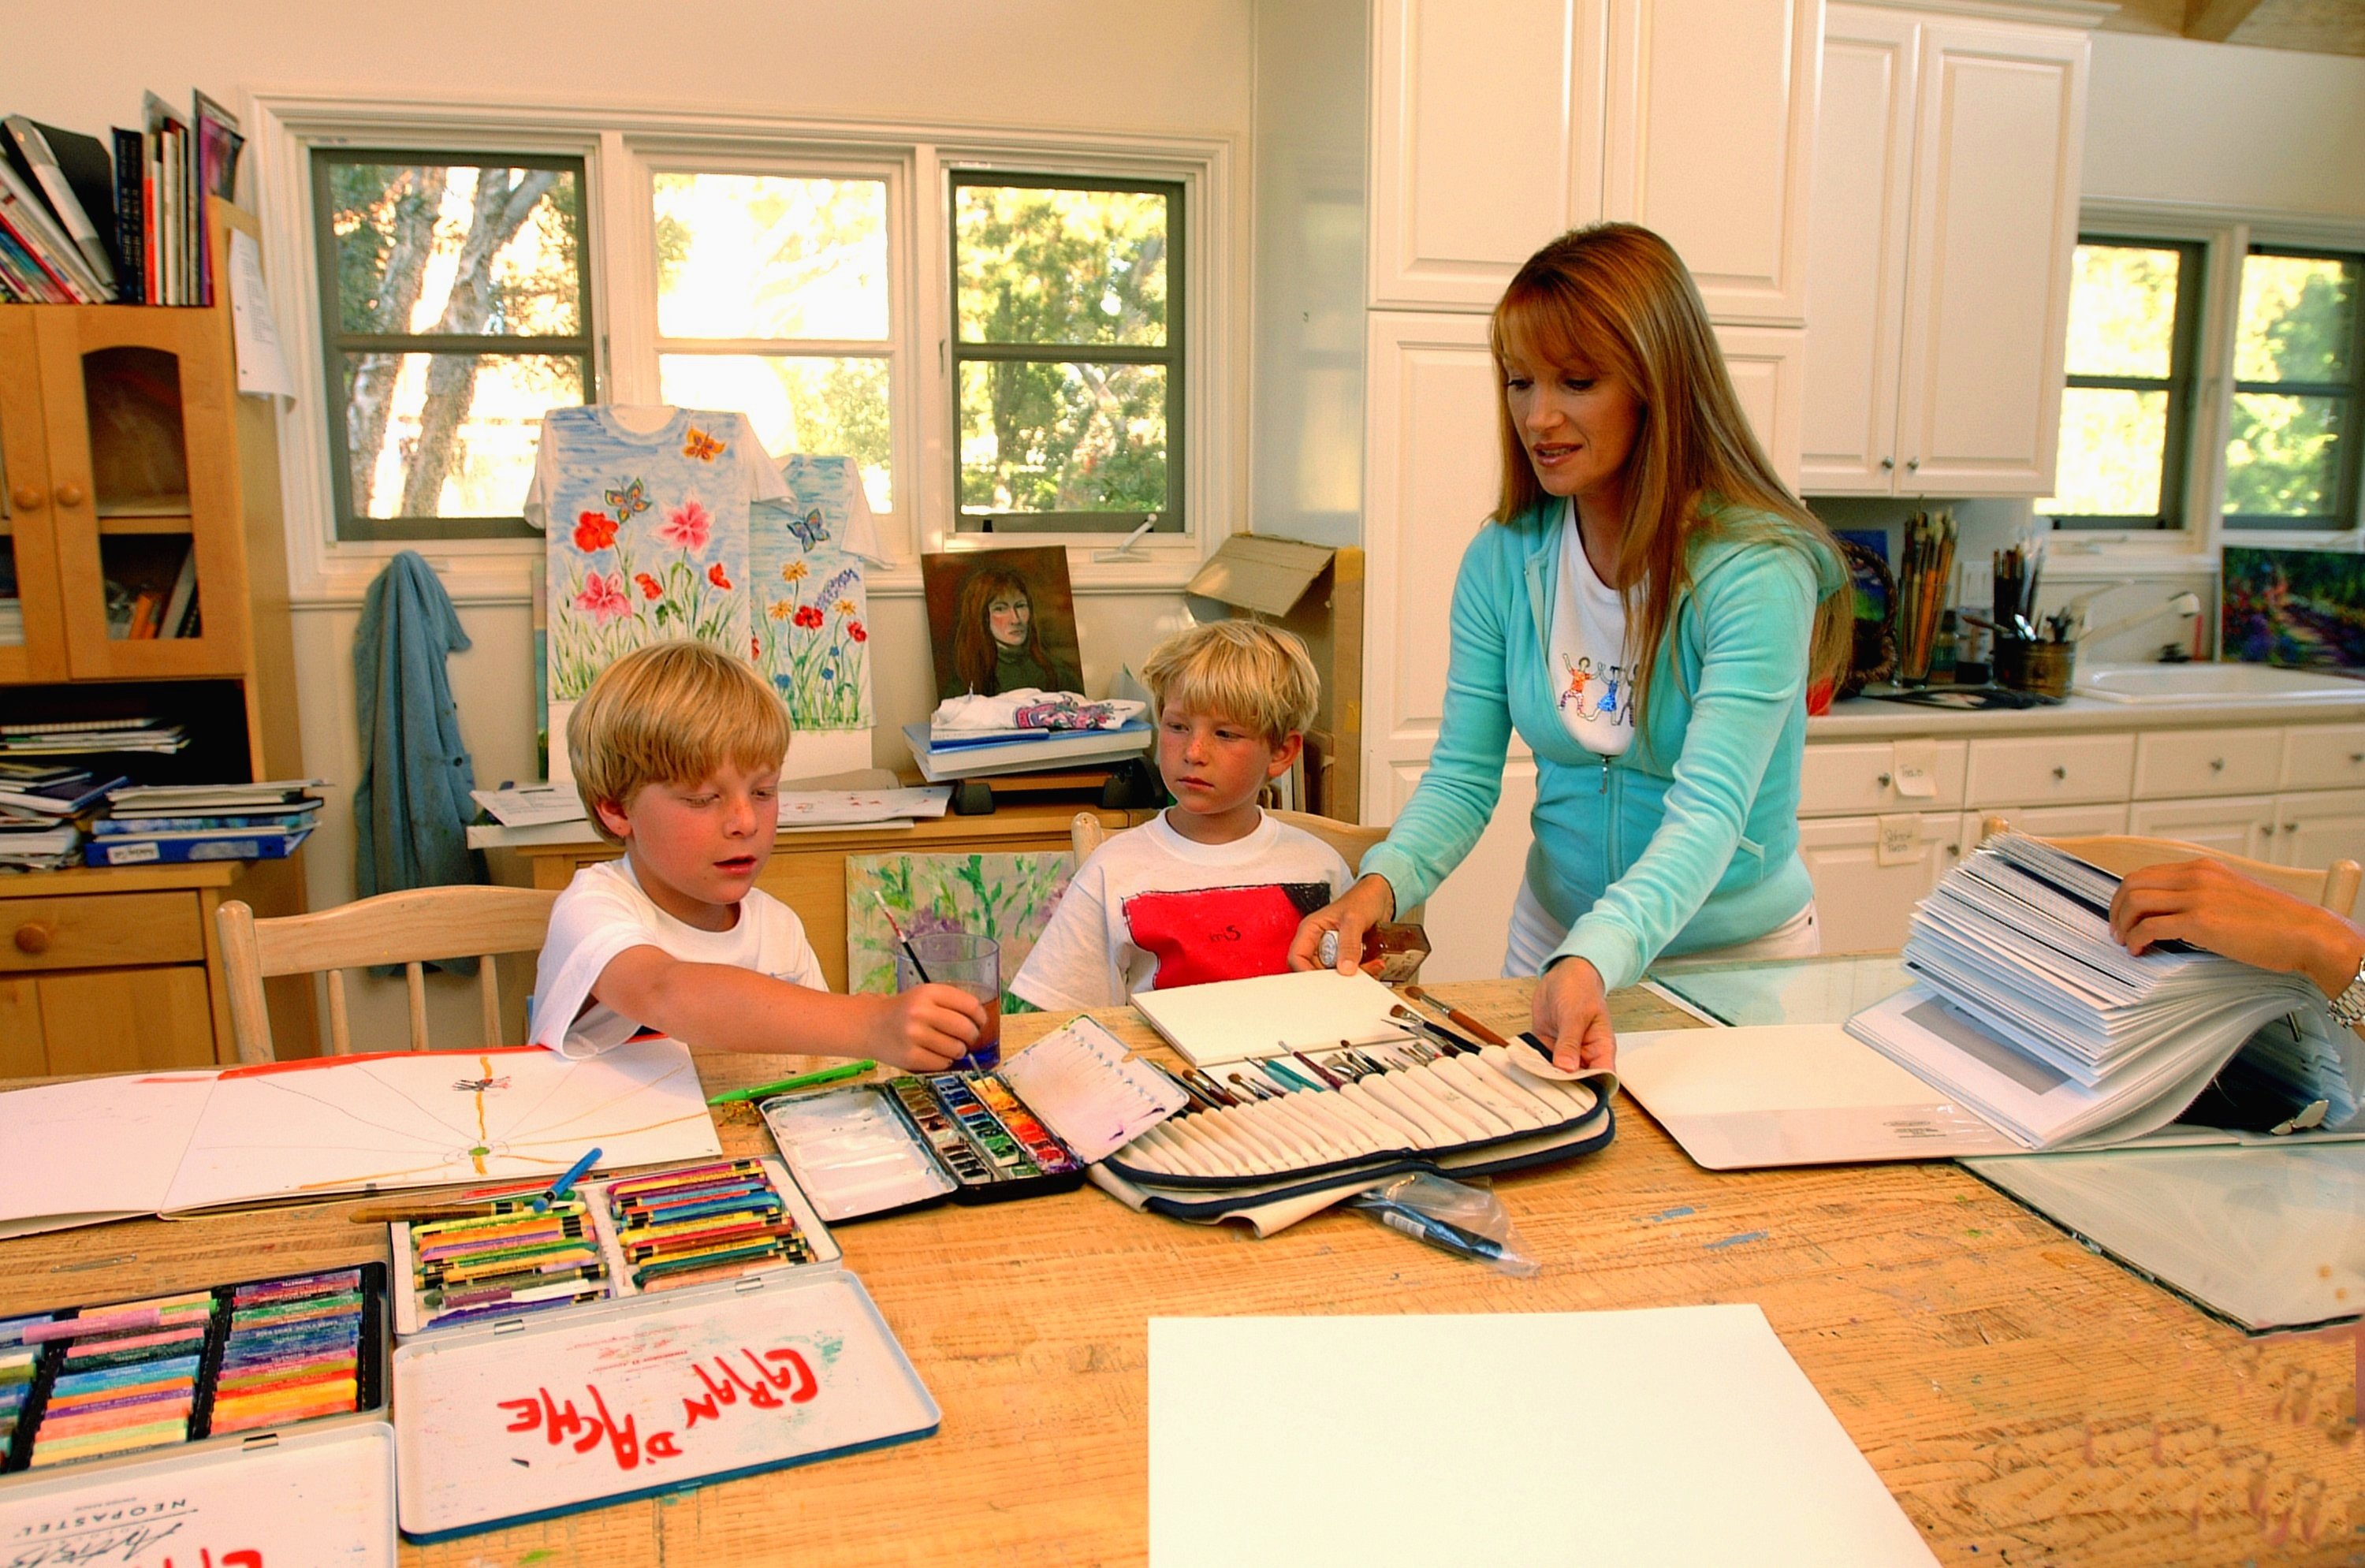  Jane Seymour in her art studio with her twin sons John and Christopher at her home on June 12, 2002. in Malibu, California | Photo: Getty Images